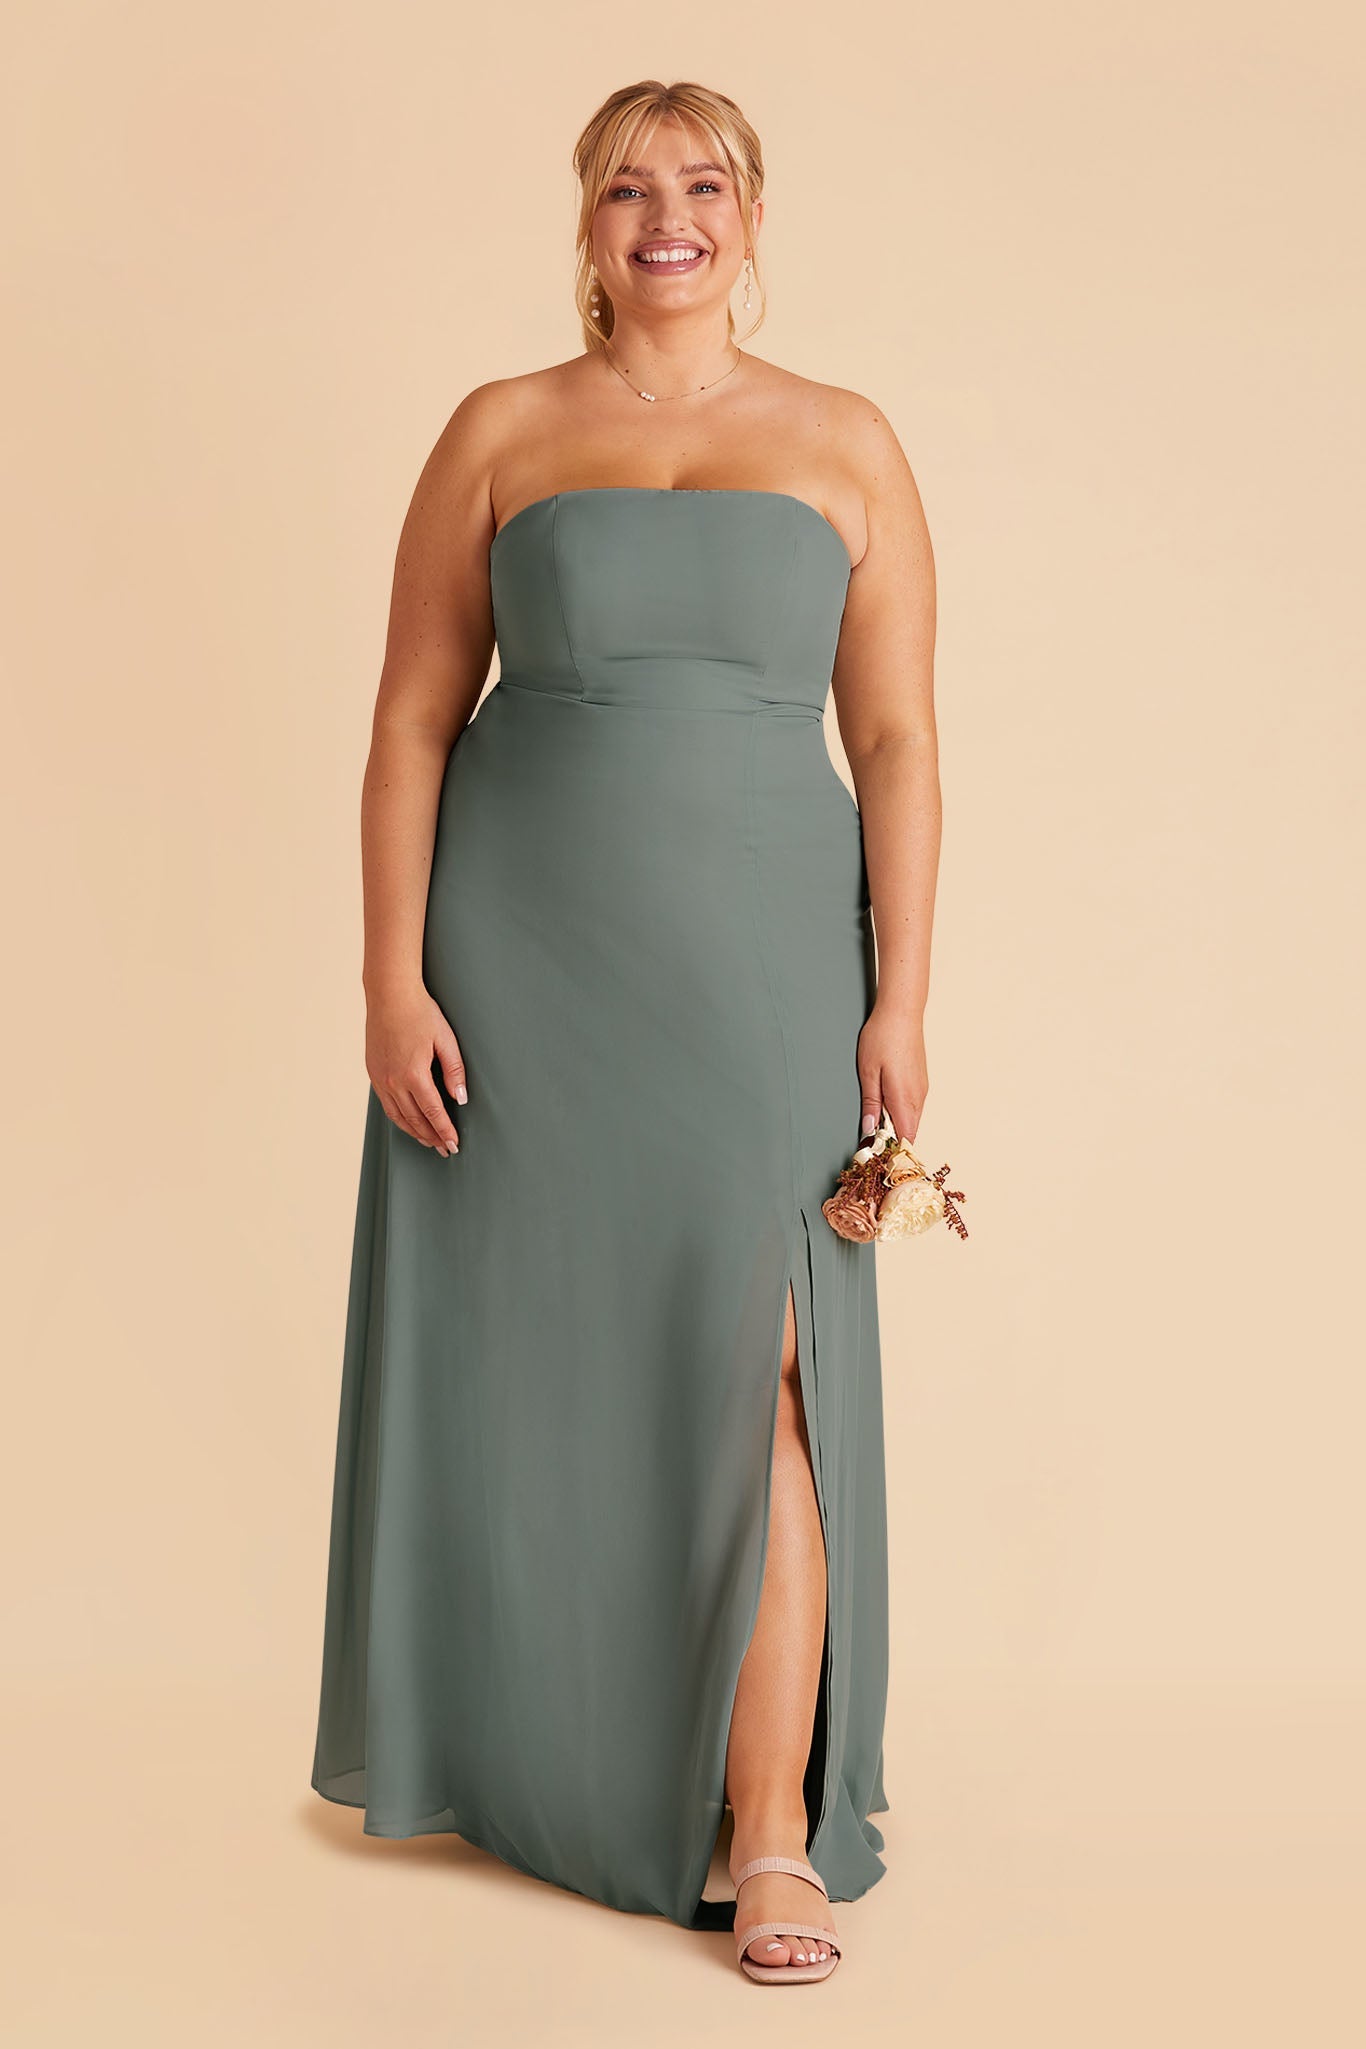 Chris plus size bridesmaid dress with slit in sea glass chiffon by Birdy Grey, front view